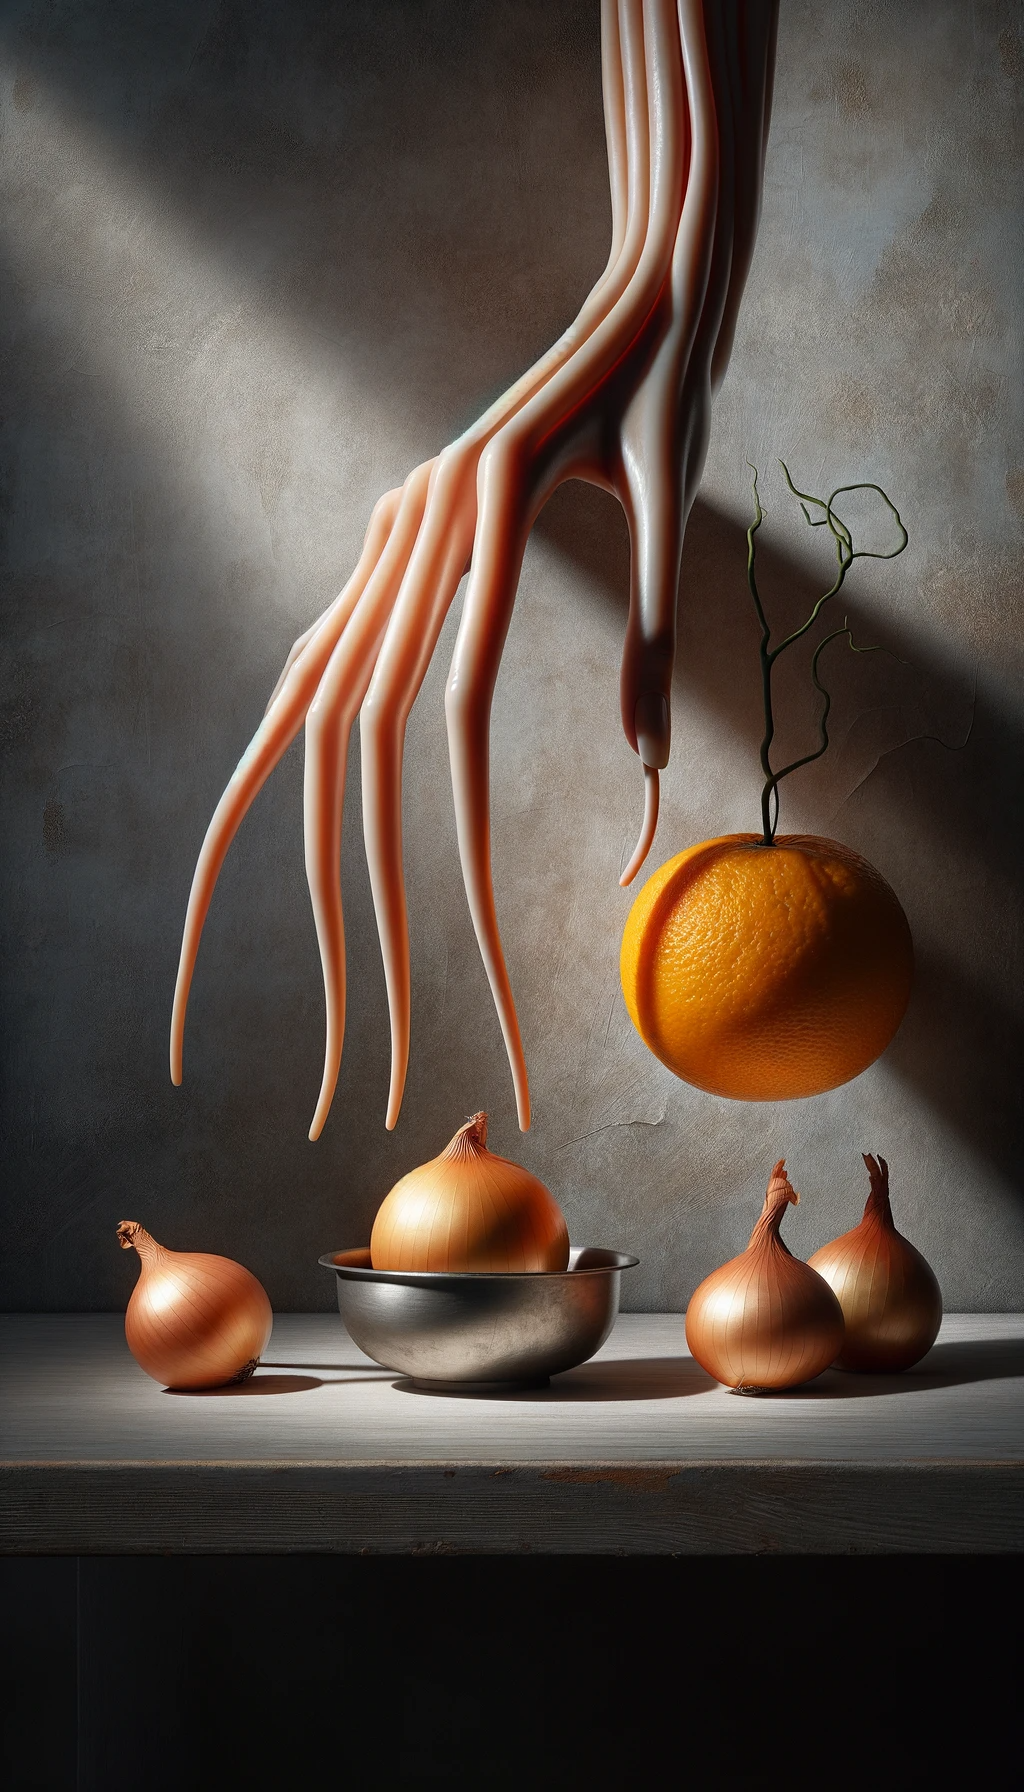 spindly fingers with onions and hanging orange